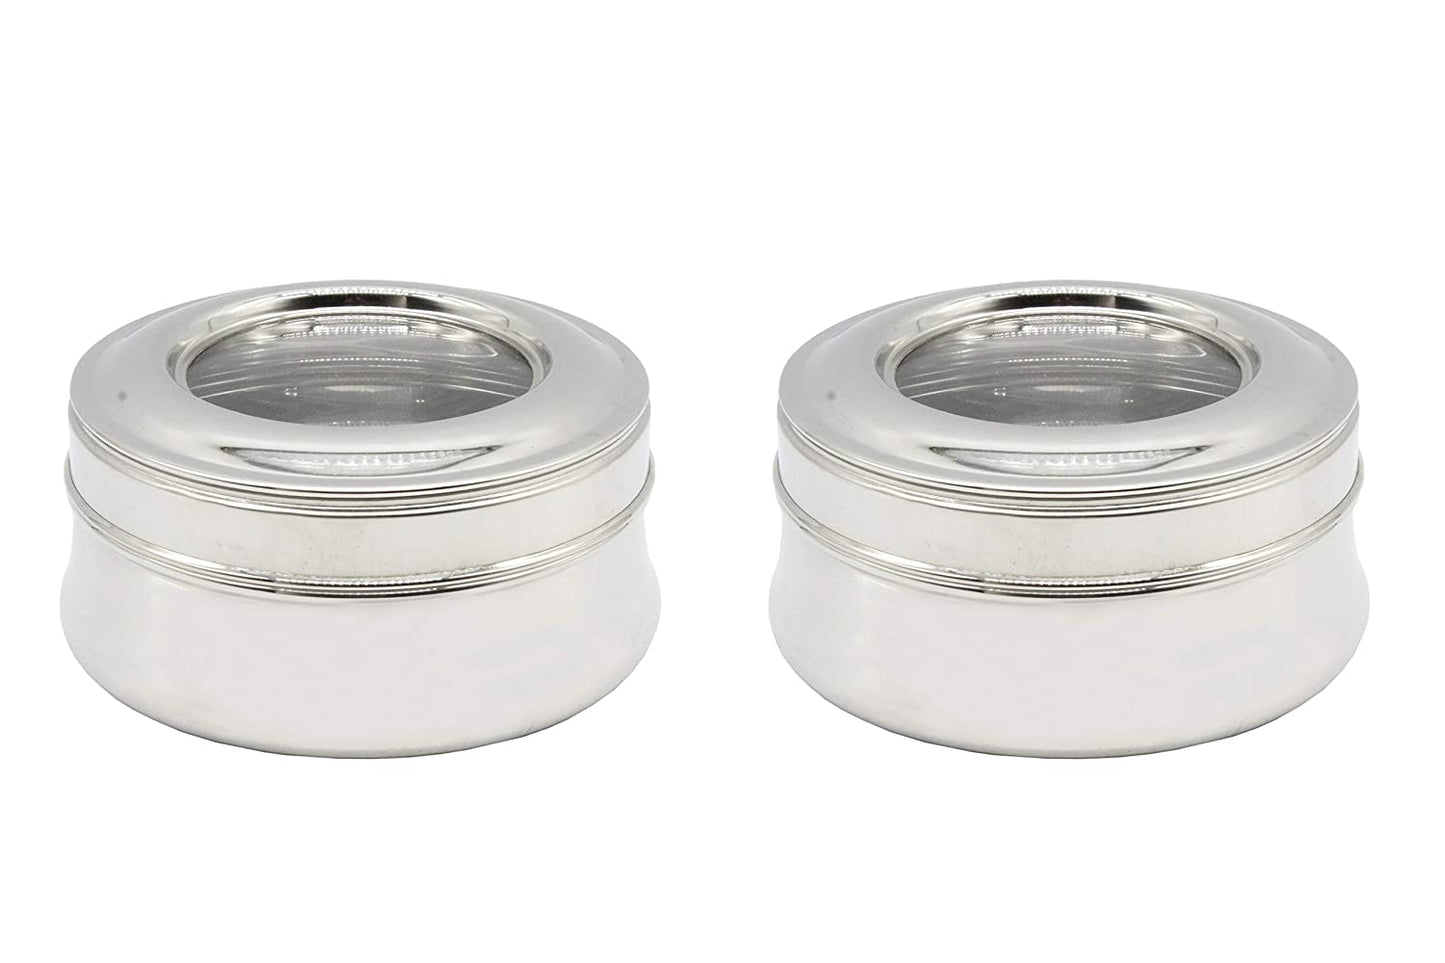 Stainless Steel See Through Lid Lunch Box | Dabba (12.5cm) 550ml - Set of 2Pcs